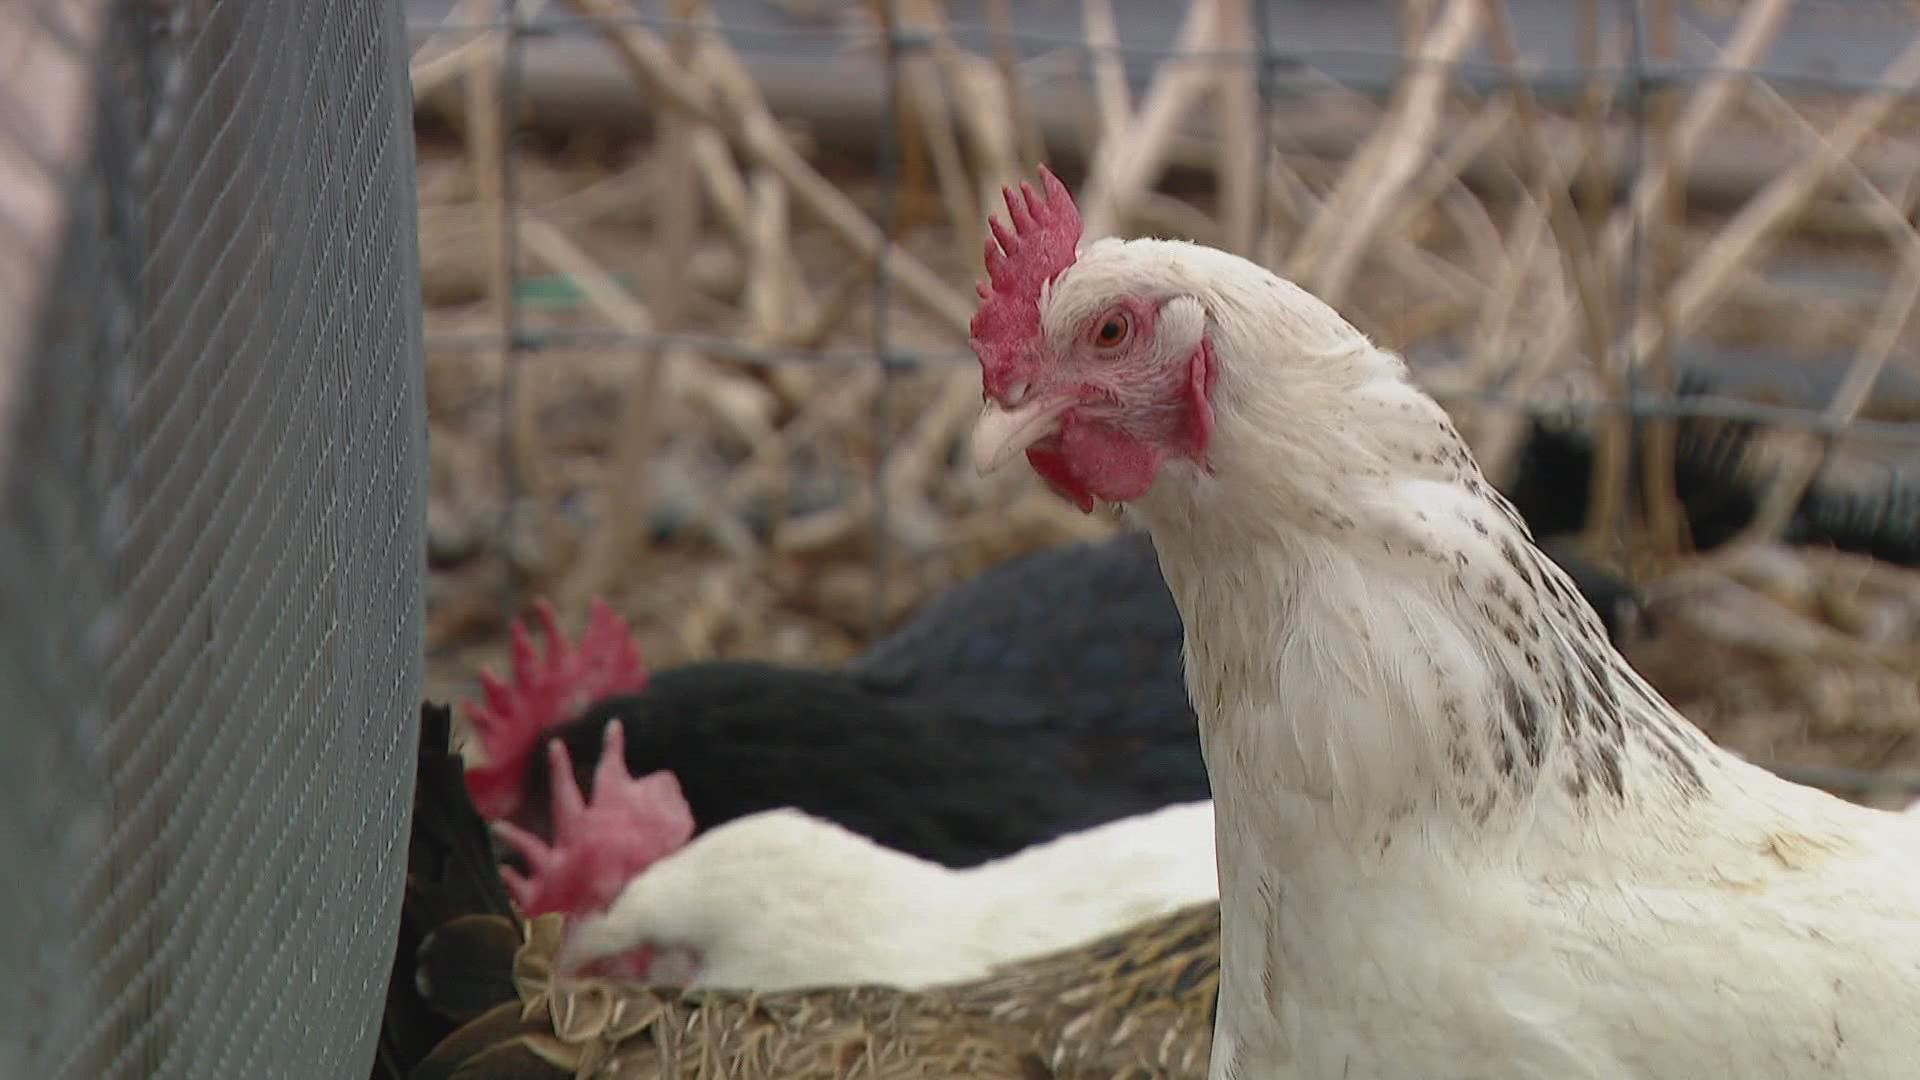 Amanda Weaver of Five Fridges Farm said she's done what she can to protect her chickens from the latest avian influenza outbreak.